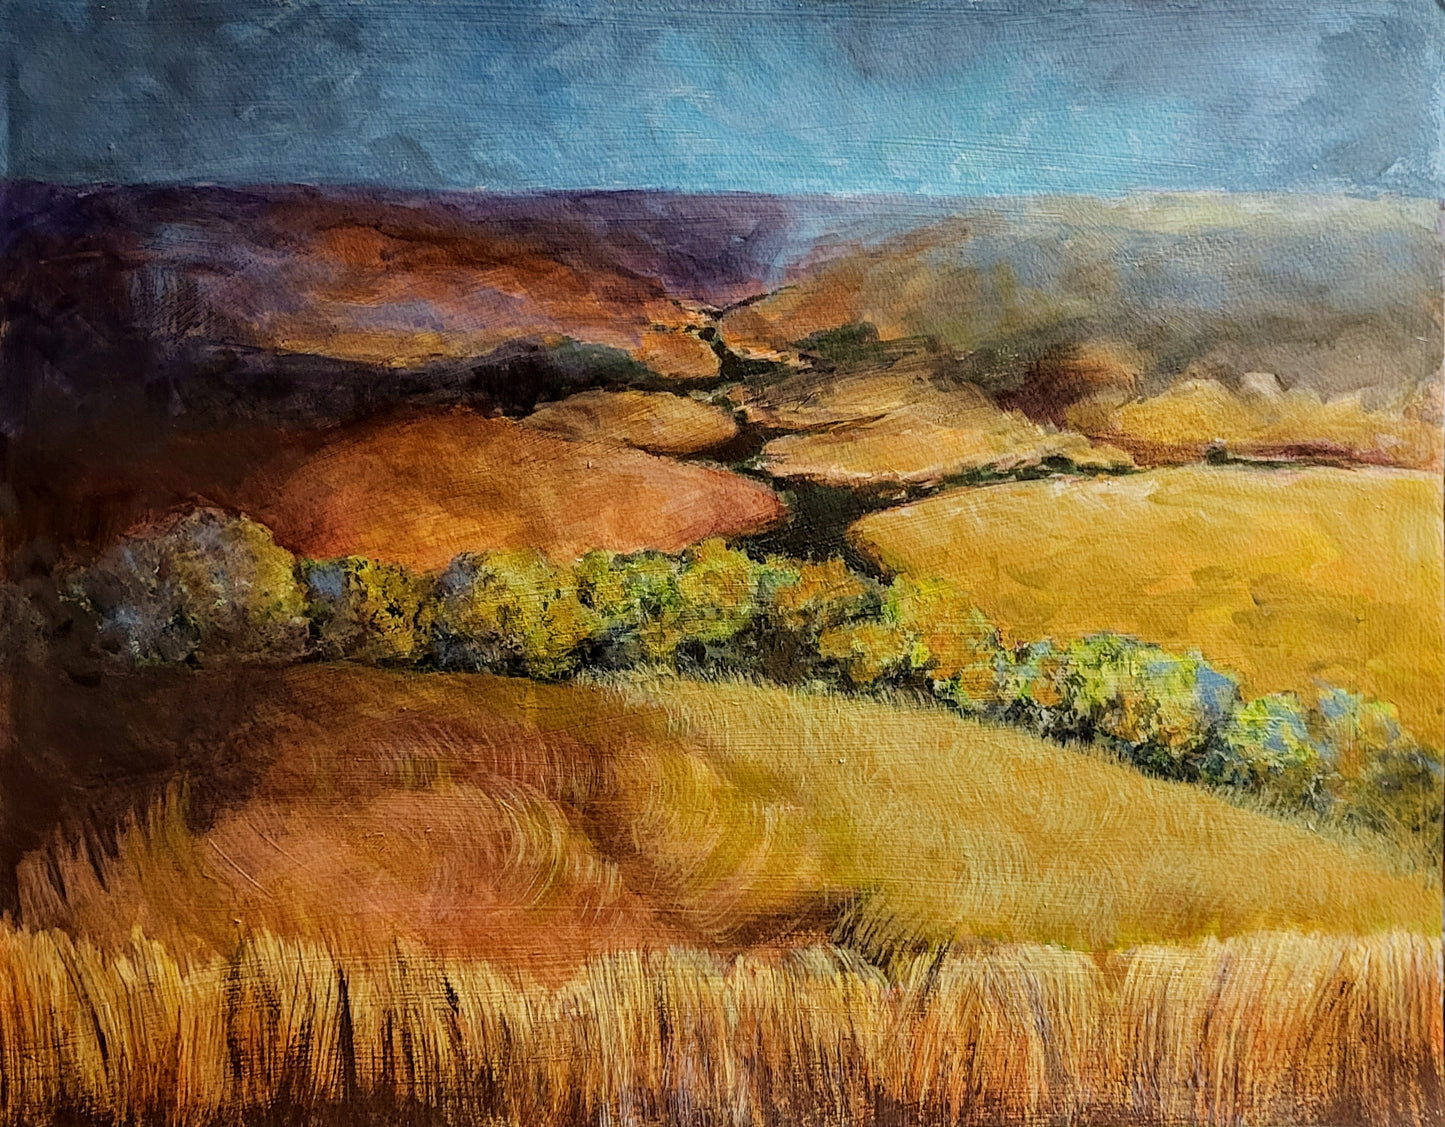 Acrylic painting on canvas of shadows crossing the flint hills at the dimming of the day.